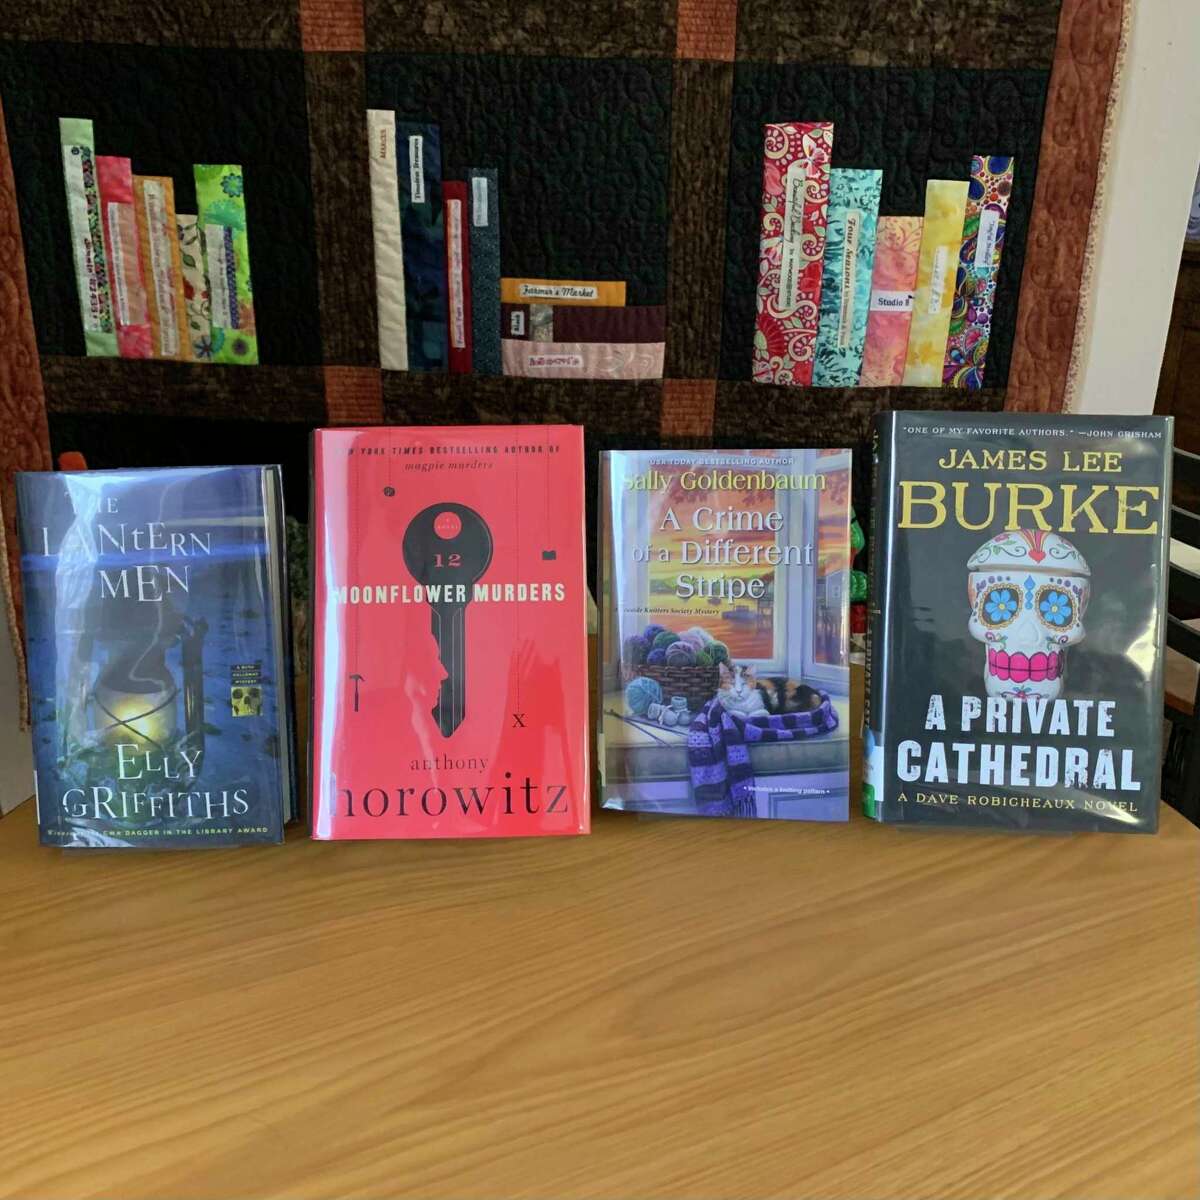 "A Private Cathedral" by James Lee Burke is the 23rd offering in the "Dave Robicheaux" series. Detective Dave Robicheaux faces his demons in New Iberia, Louisiana while searching for two runaways and avoiding their mafia family.(Courtesy photo)